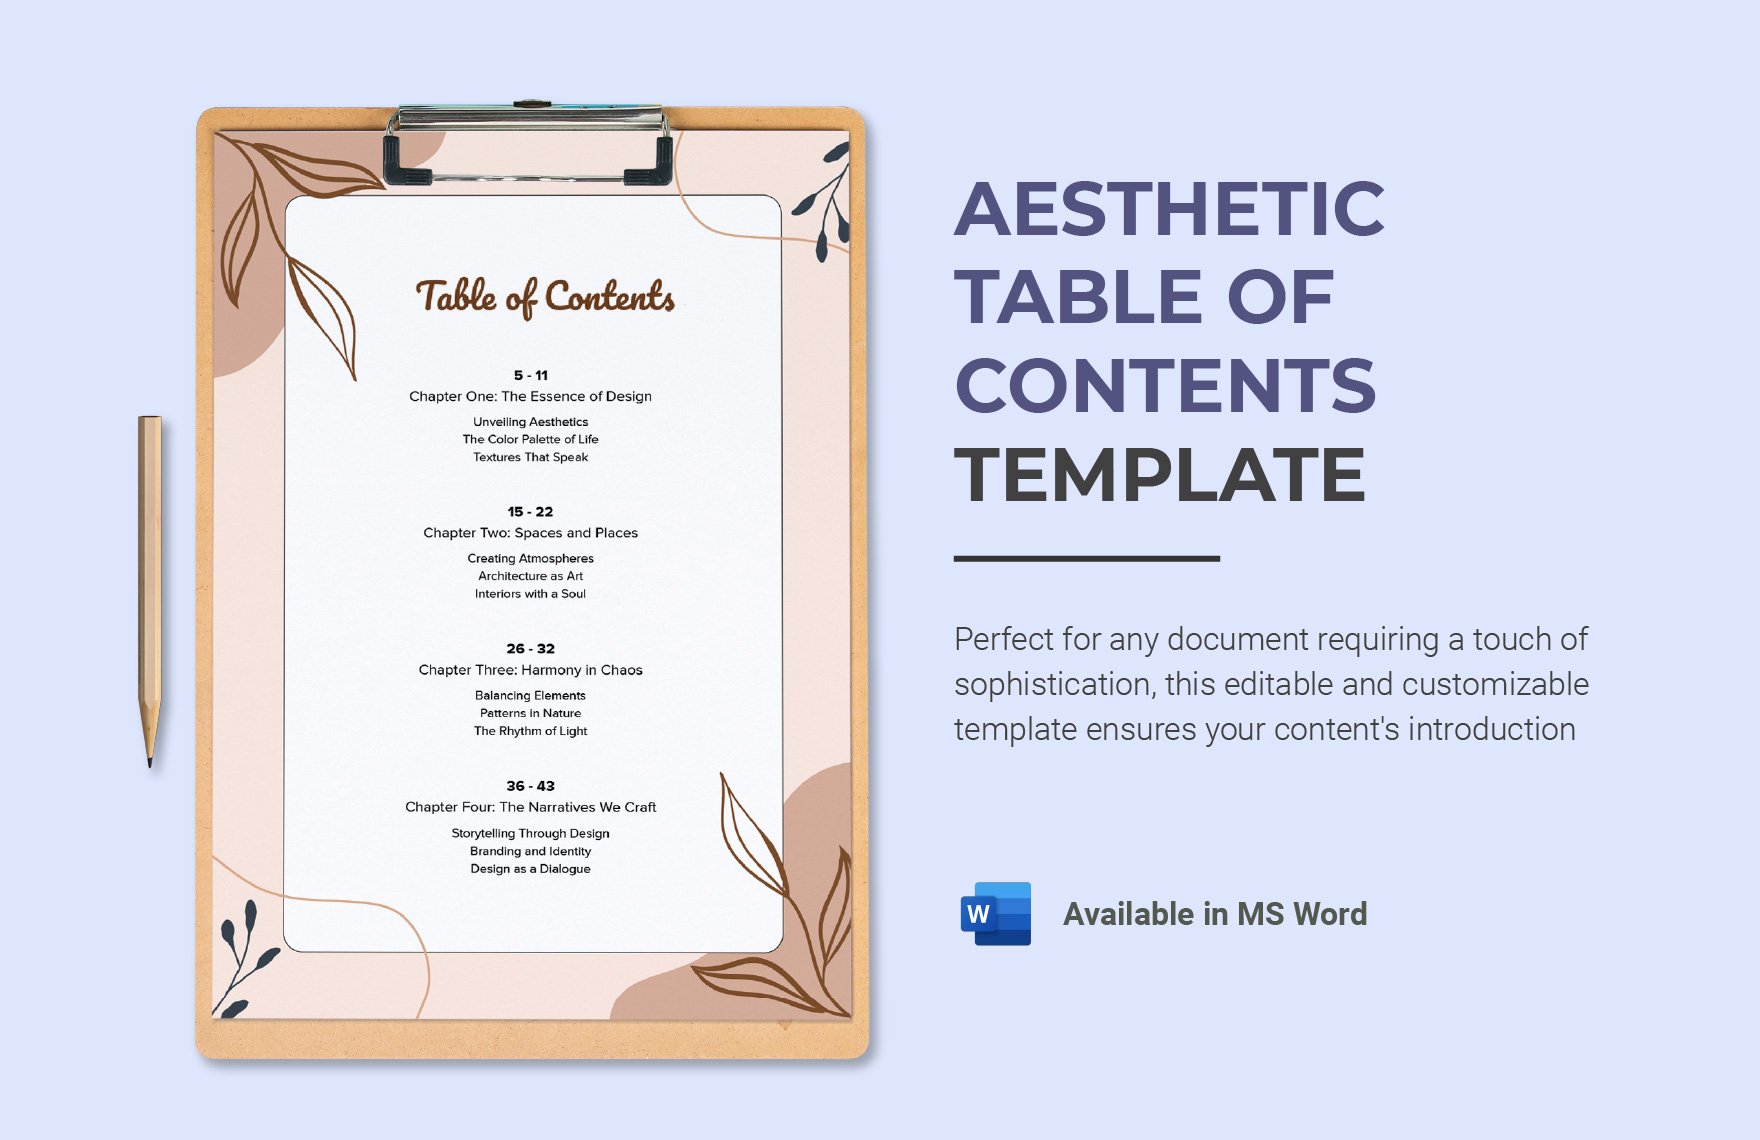 Aesthetic Table of Contents Template